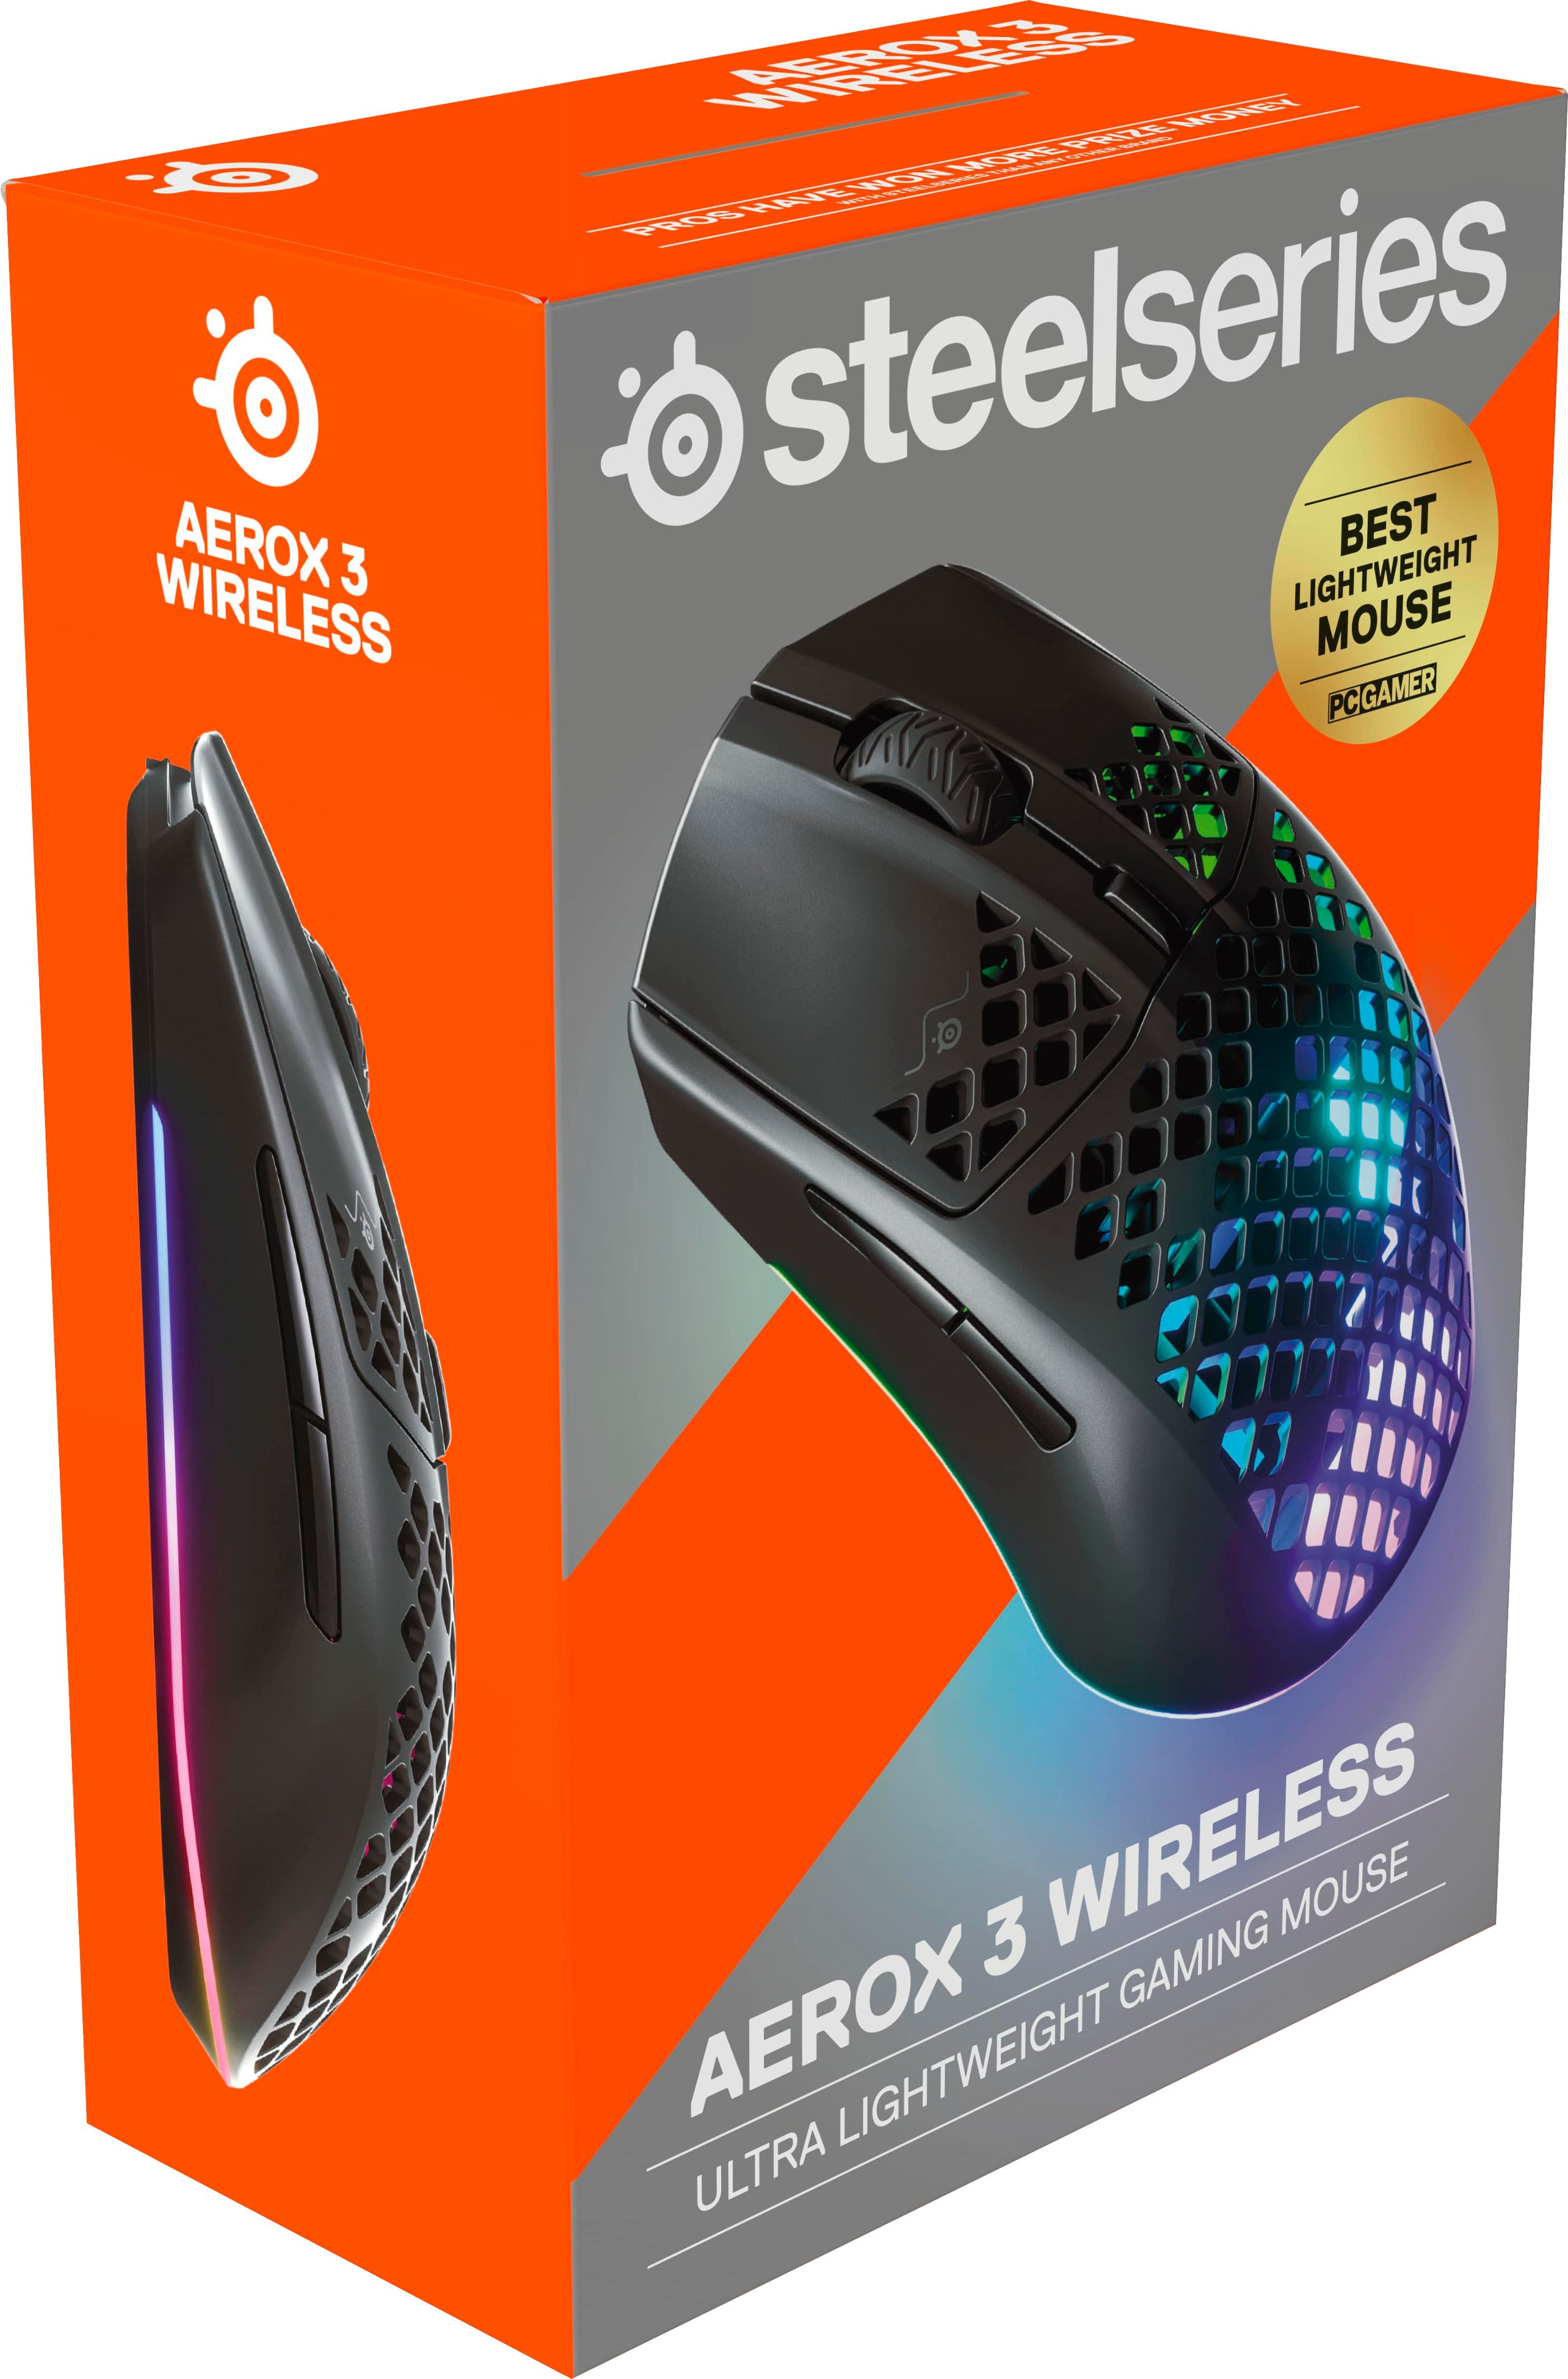 SteelSeries Aerox 3 Super Gaming - Mouse Best Honeycomb Wireless RGB Onyx 62612 Optical Buy Light